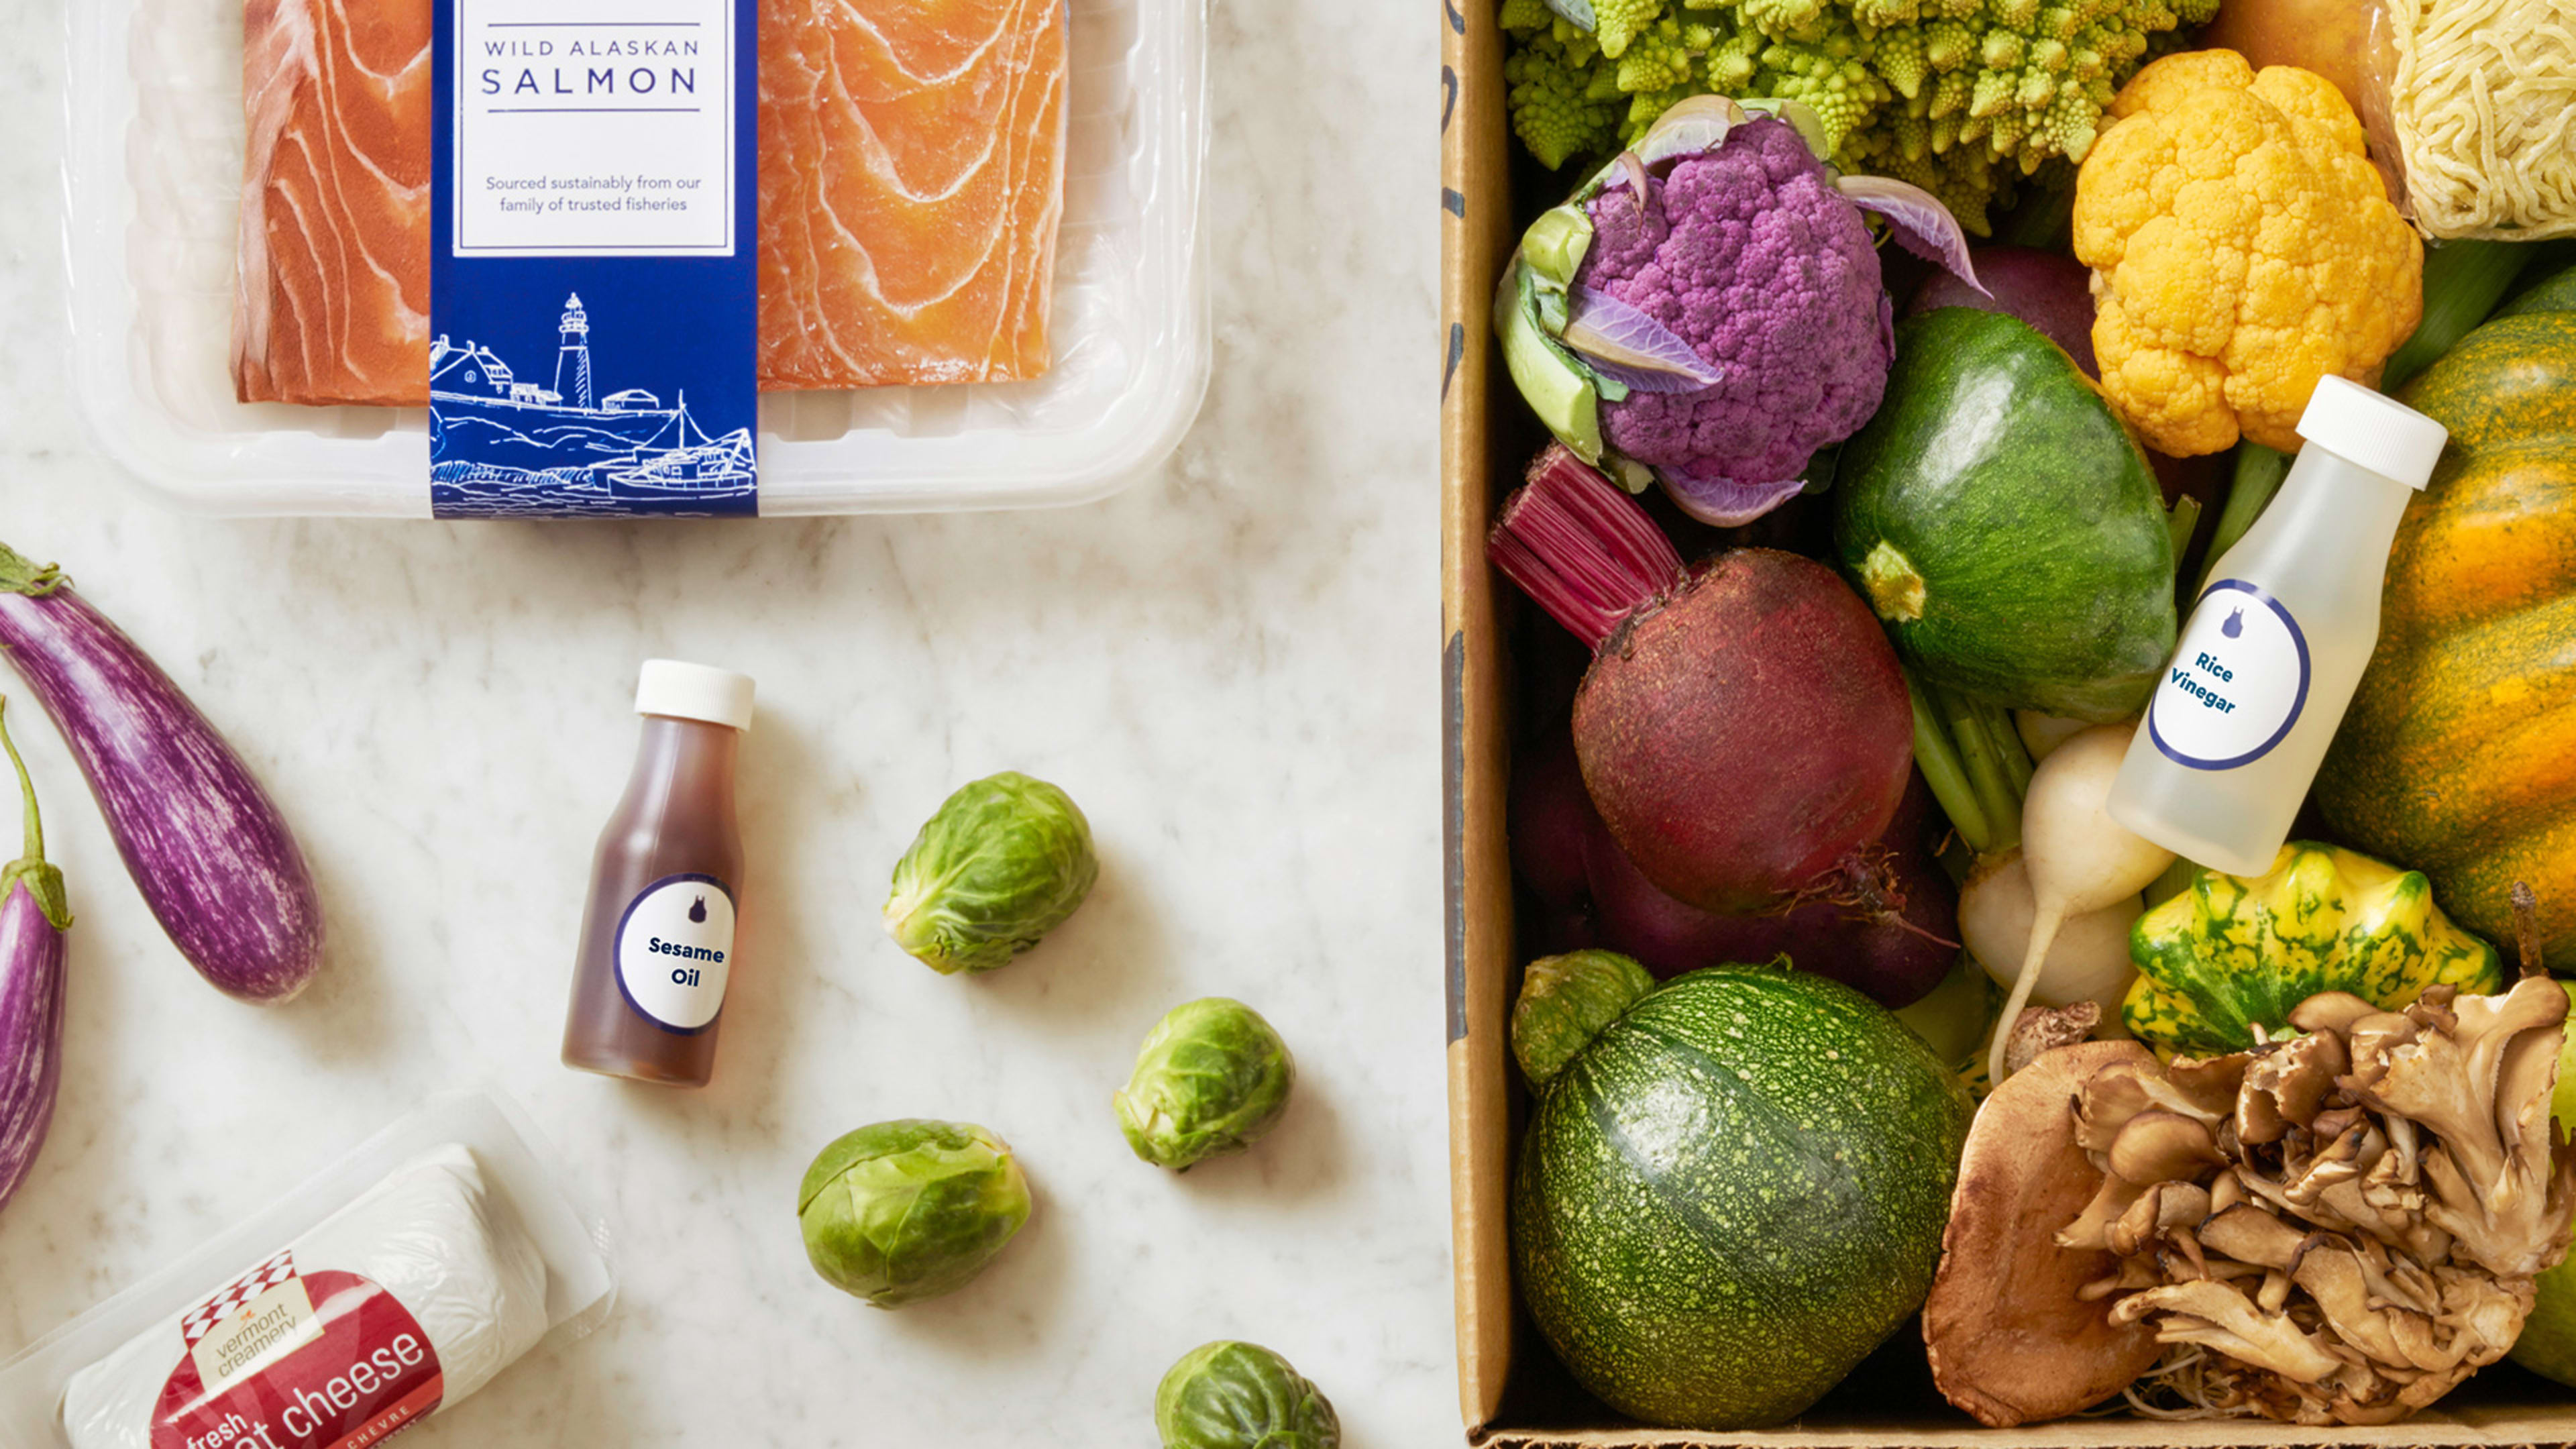 Blue Apron gets hit with lawsuit accusing it of misleading shareholders